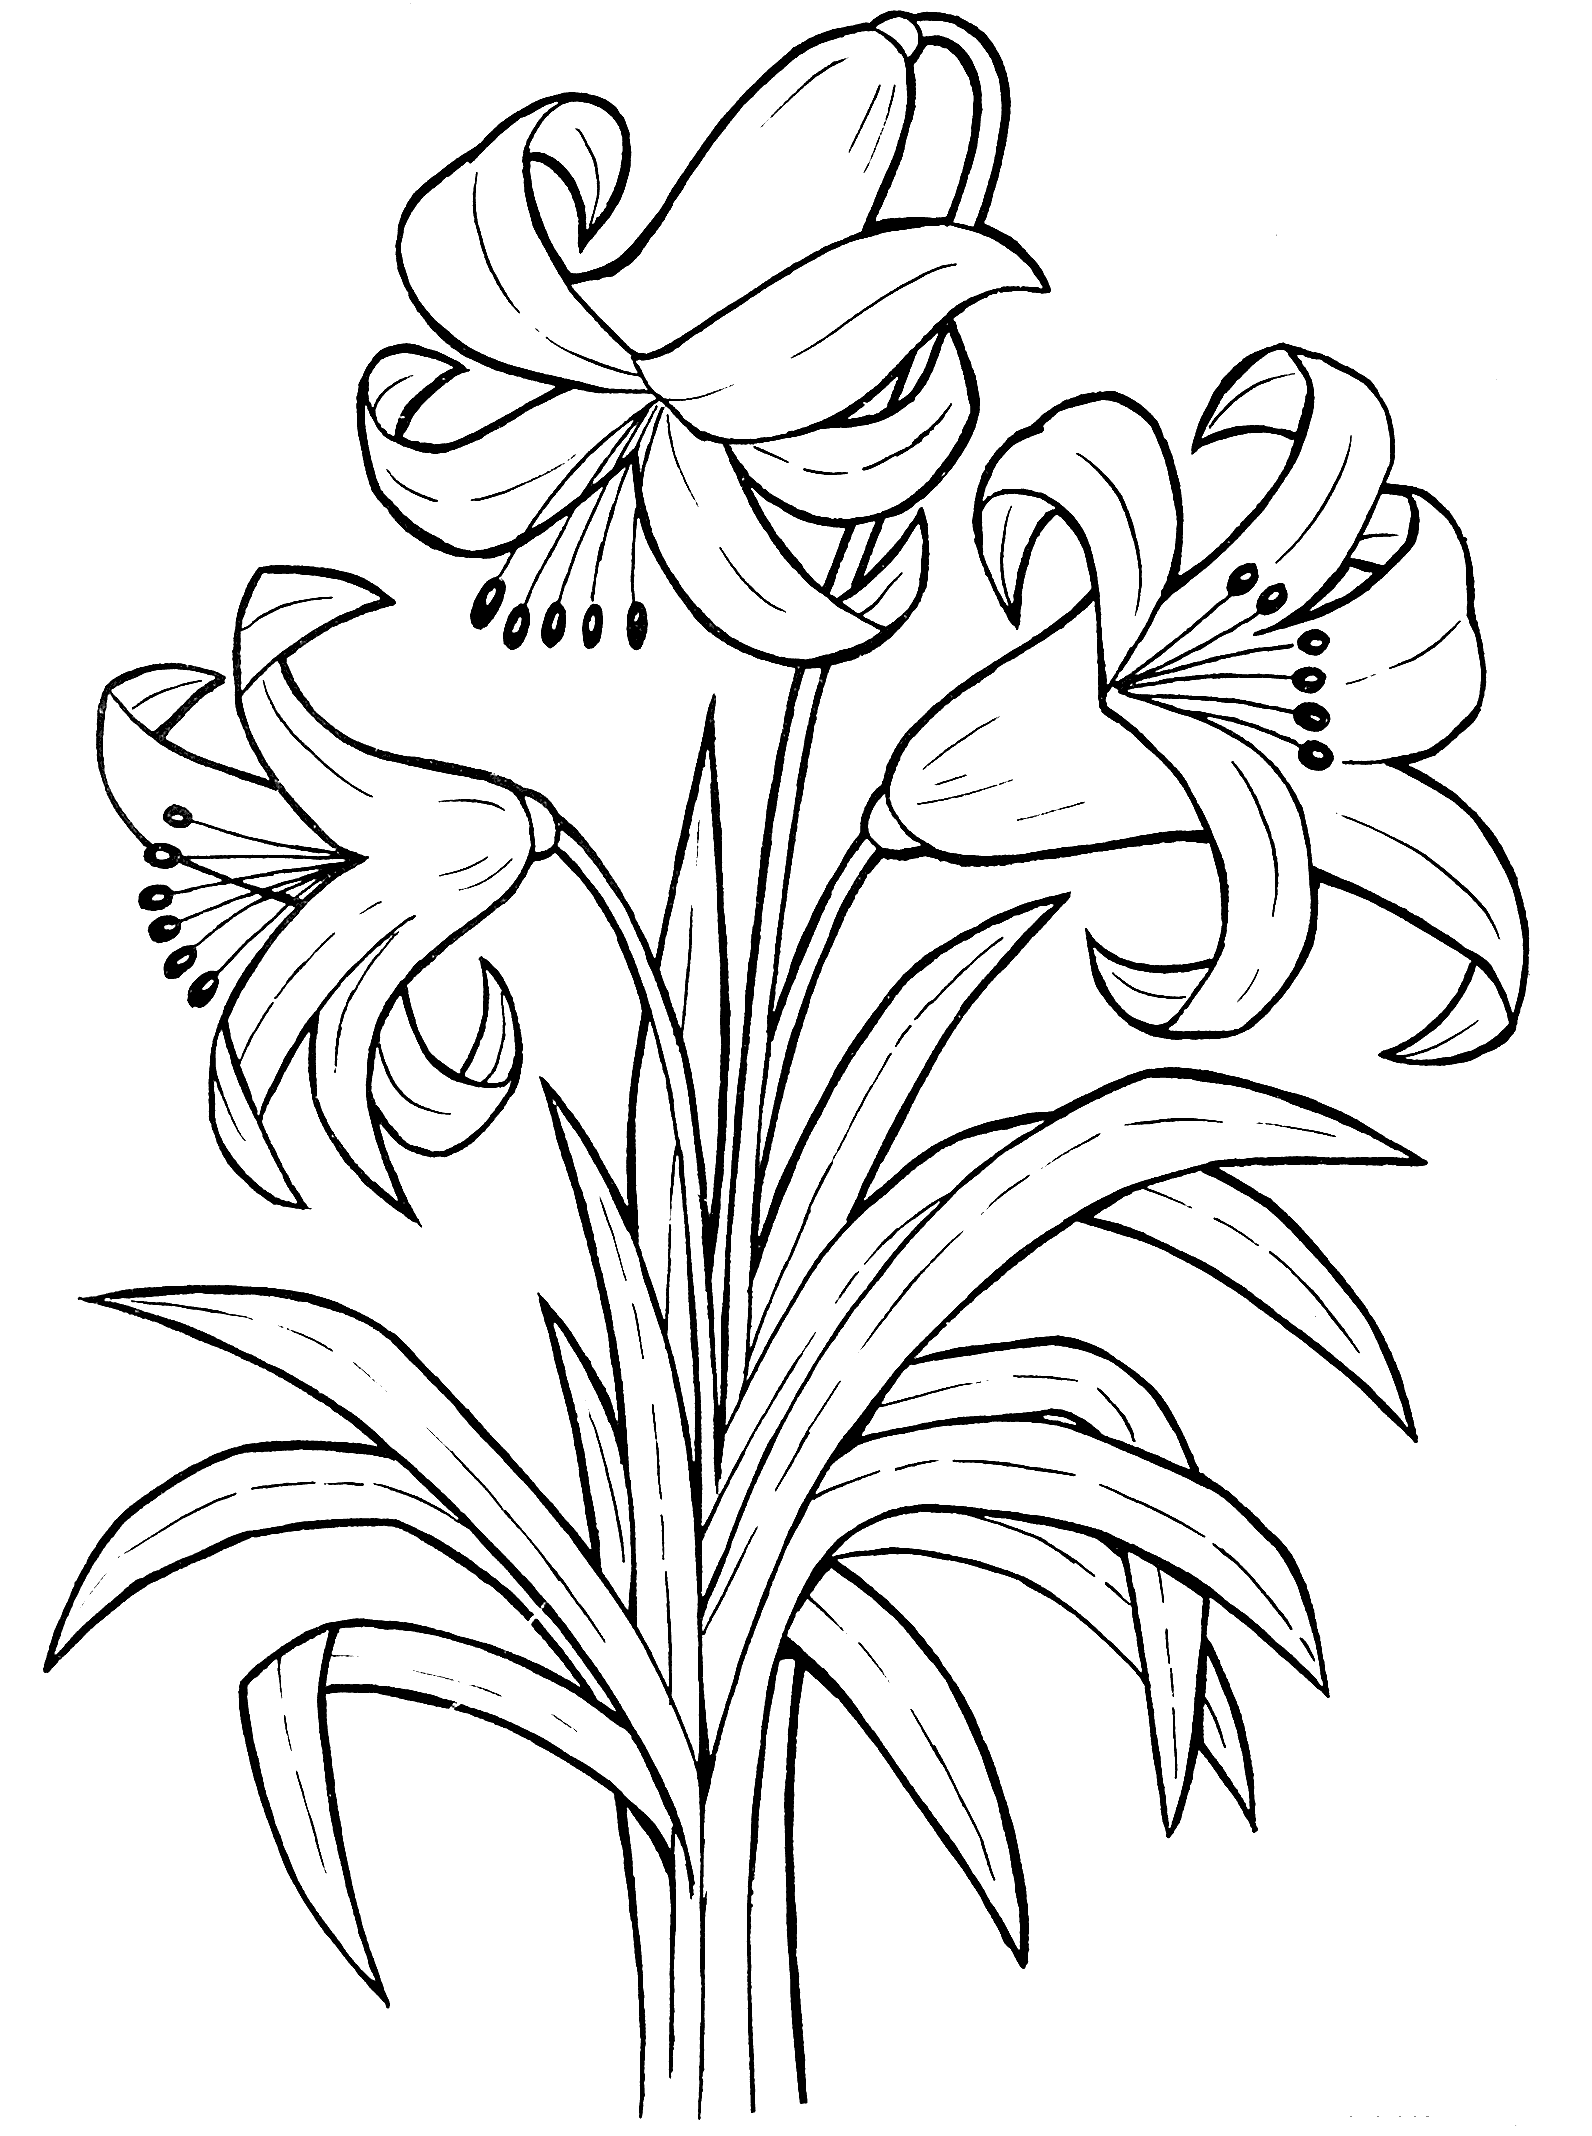 Coloring picture of the most beautiful lilies